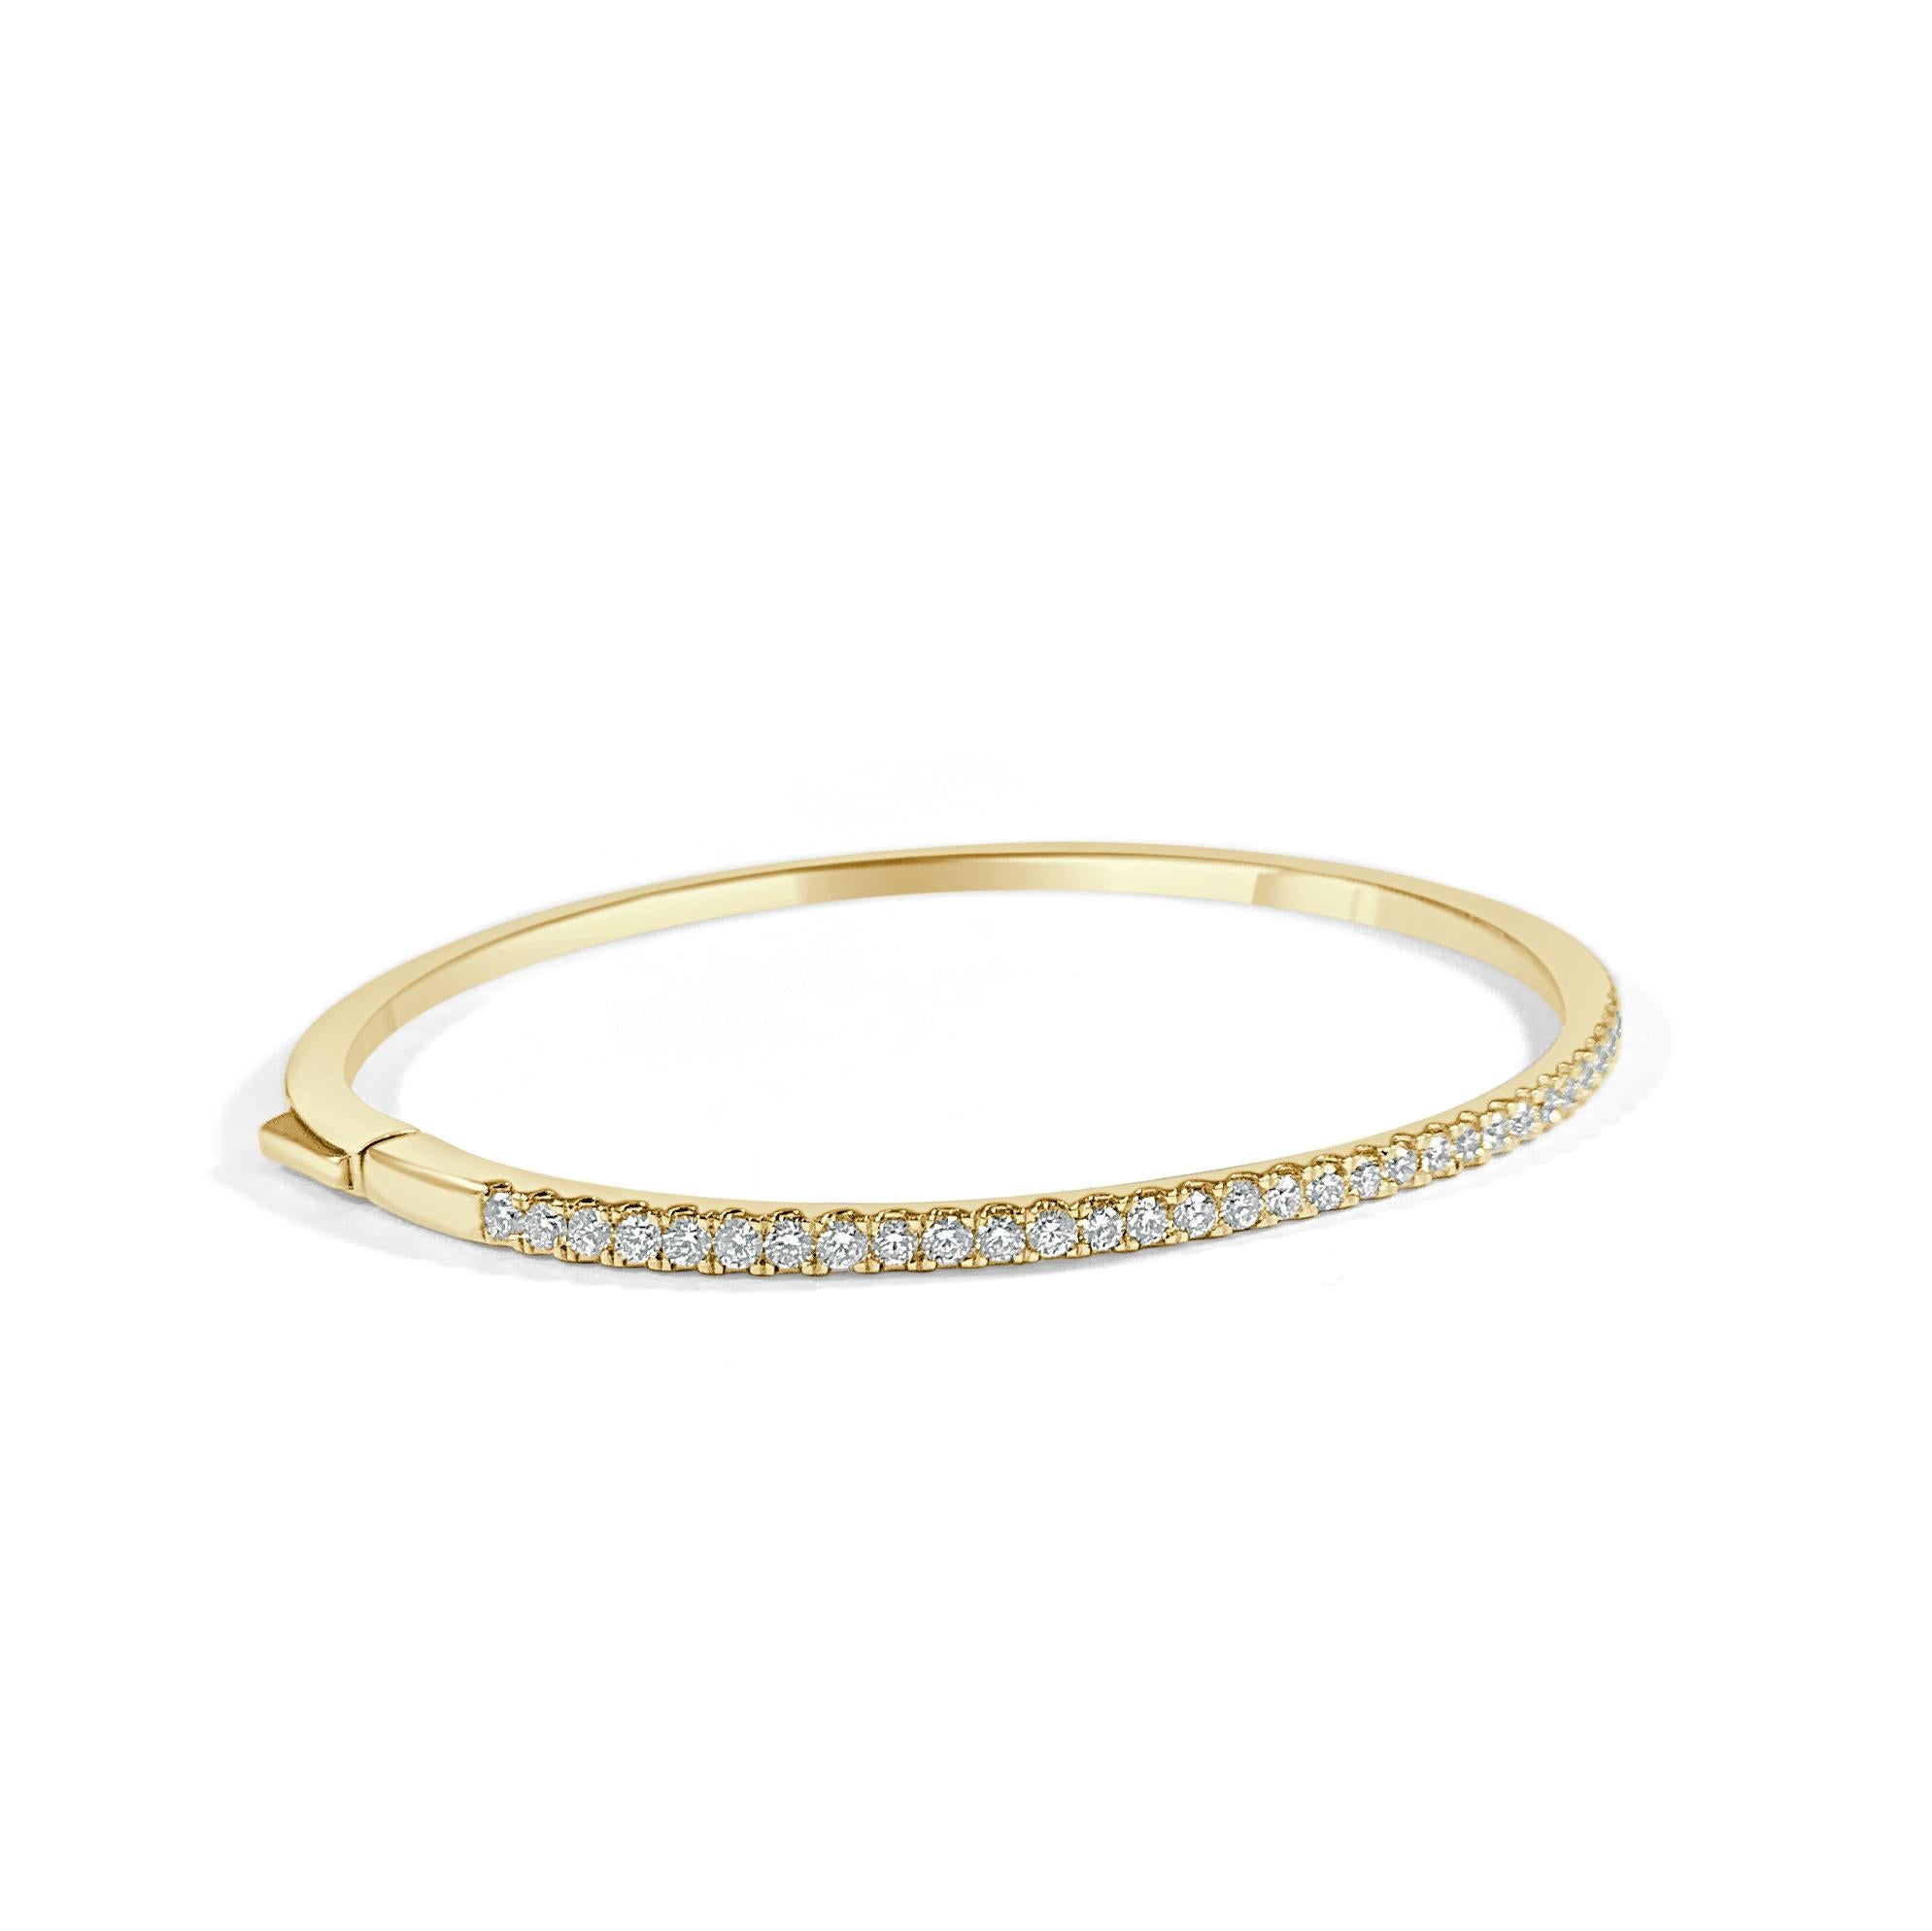 Are you looking to add some sophistication to your ensemble? This elegant diamond bangle for features a row of brilliant round diamonds set in 14k gold. Diamond Color and Clarity is GH SI1-SI2. 
-14K Gold
-1.0 ct. Natural White Diamonds
-Diamond